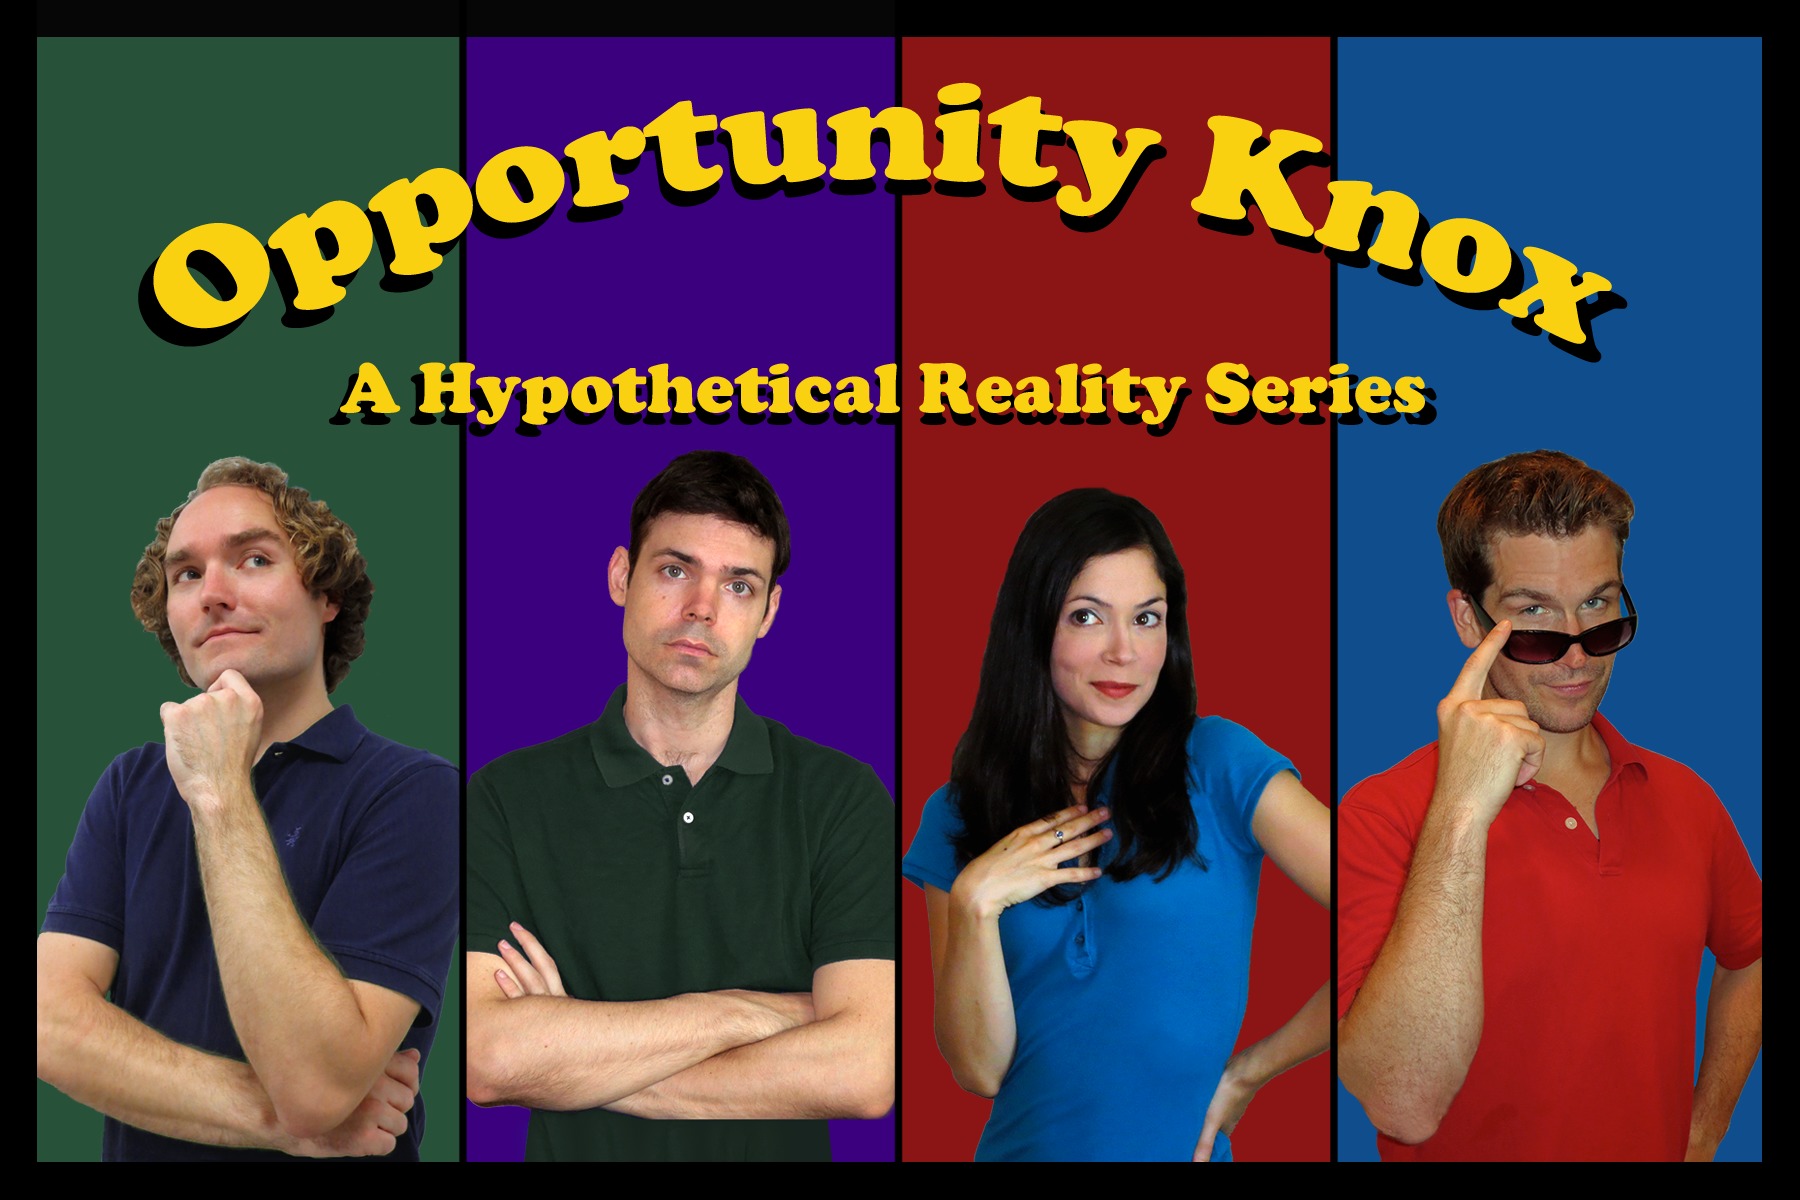 Nikki is the creator/producer of the web series comedy Opportunity Knox.